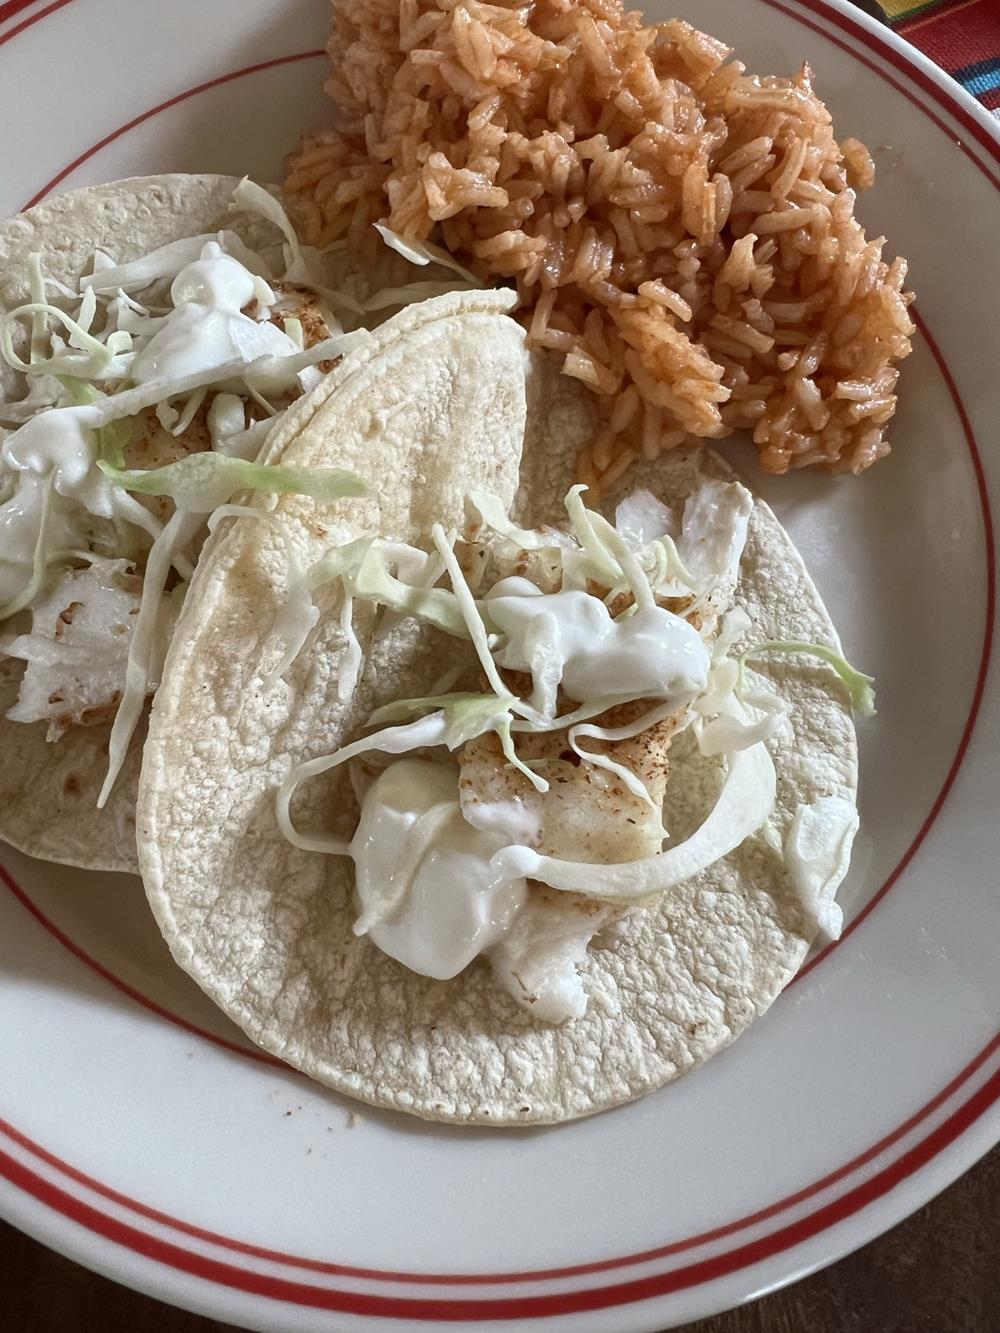 fish tacos on corn tortillas with Mexican rice